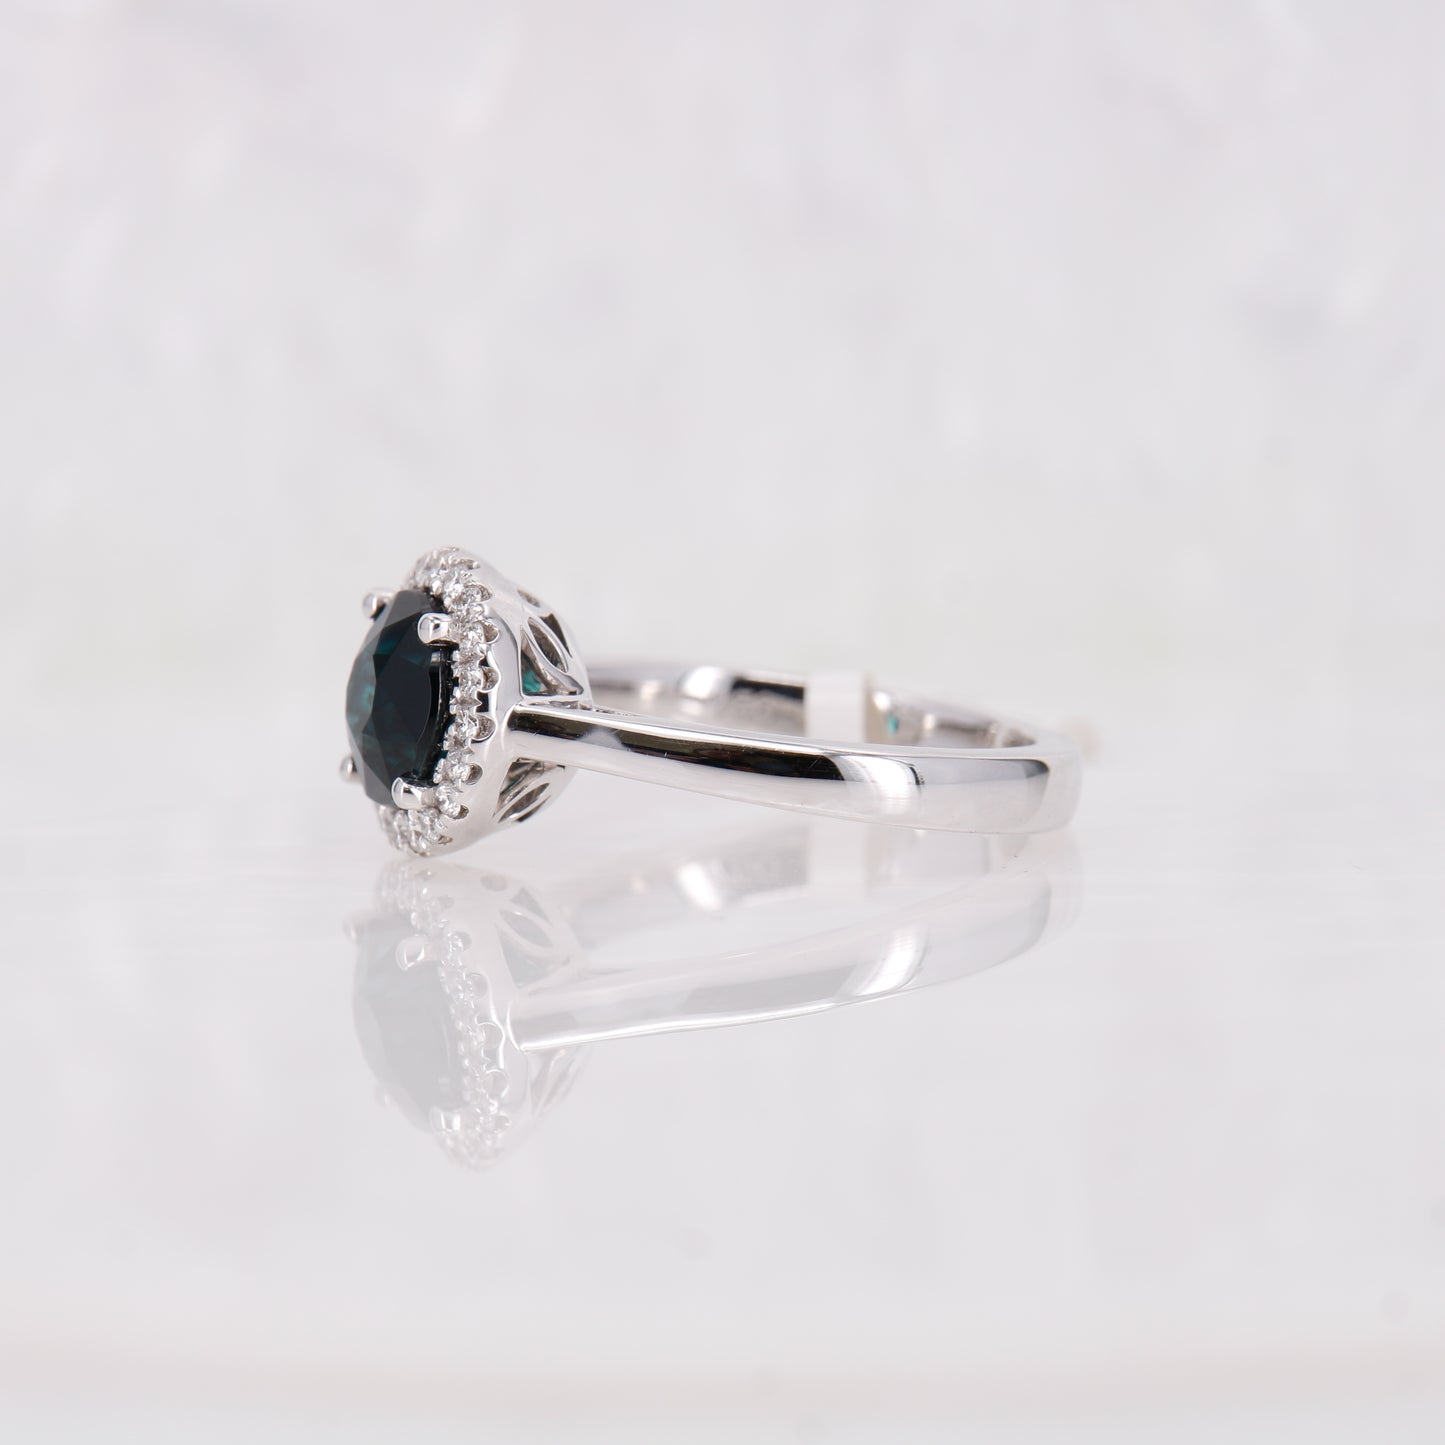 Blue tourmaline and diamond halo ring set in 18ct white gold. 